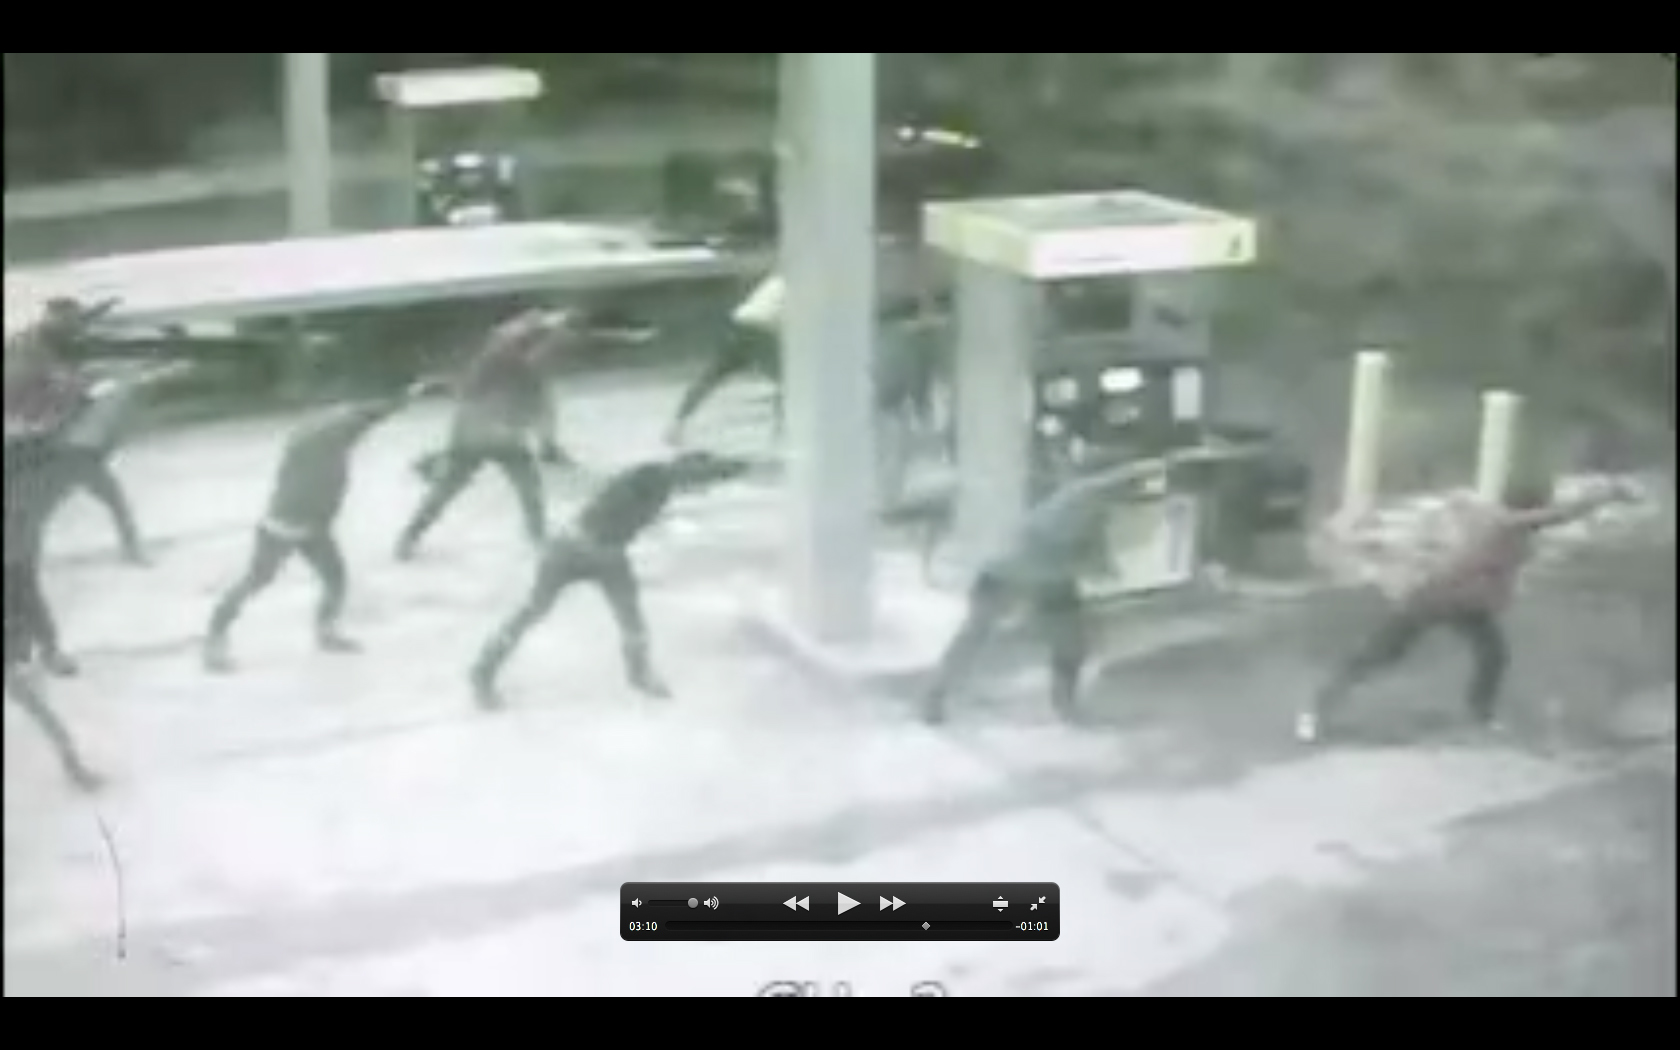 Dancers do a flash mob dance recorded by surveillance cameras at Petro Express.